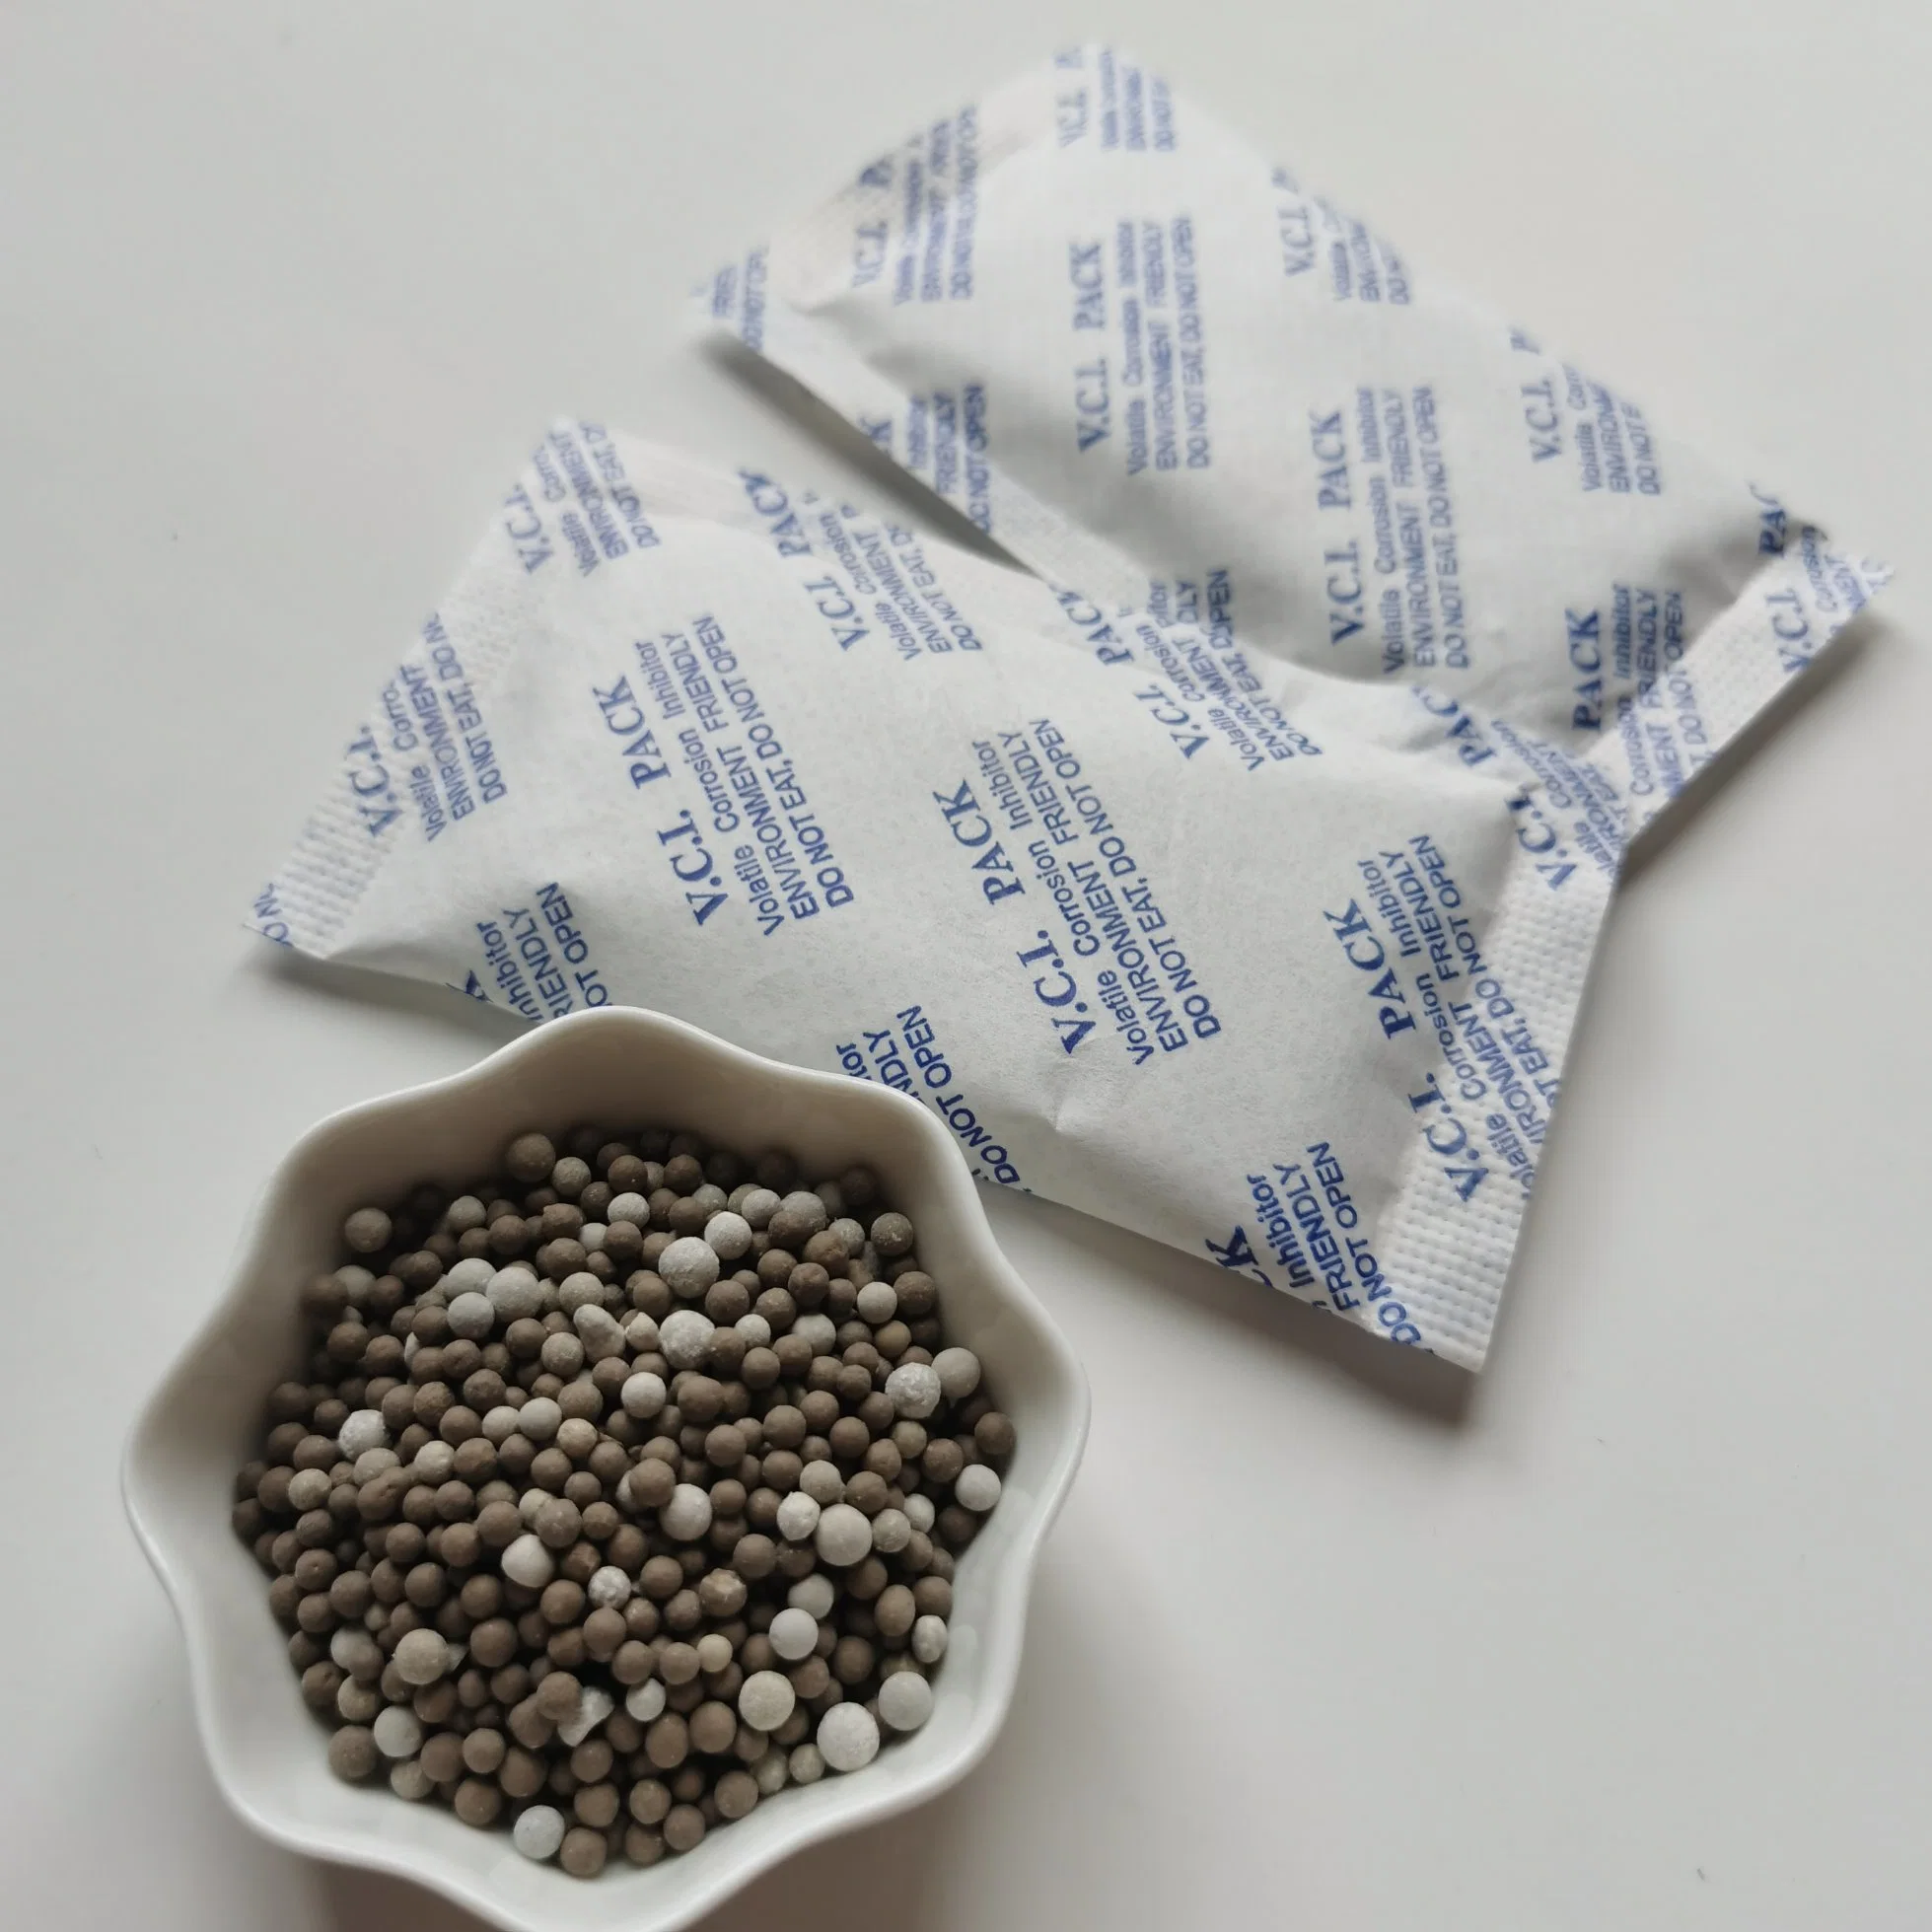 Vci Kraft Paper Reusable Calcium Chloride Clay Desiccant for Auto Spare Parts Anti-Rust Packaging